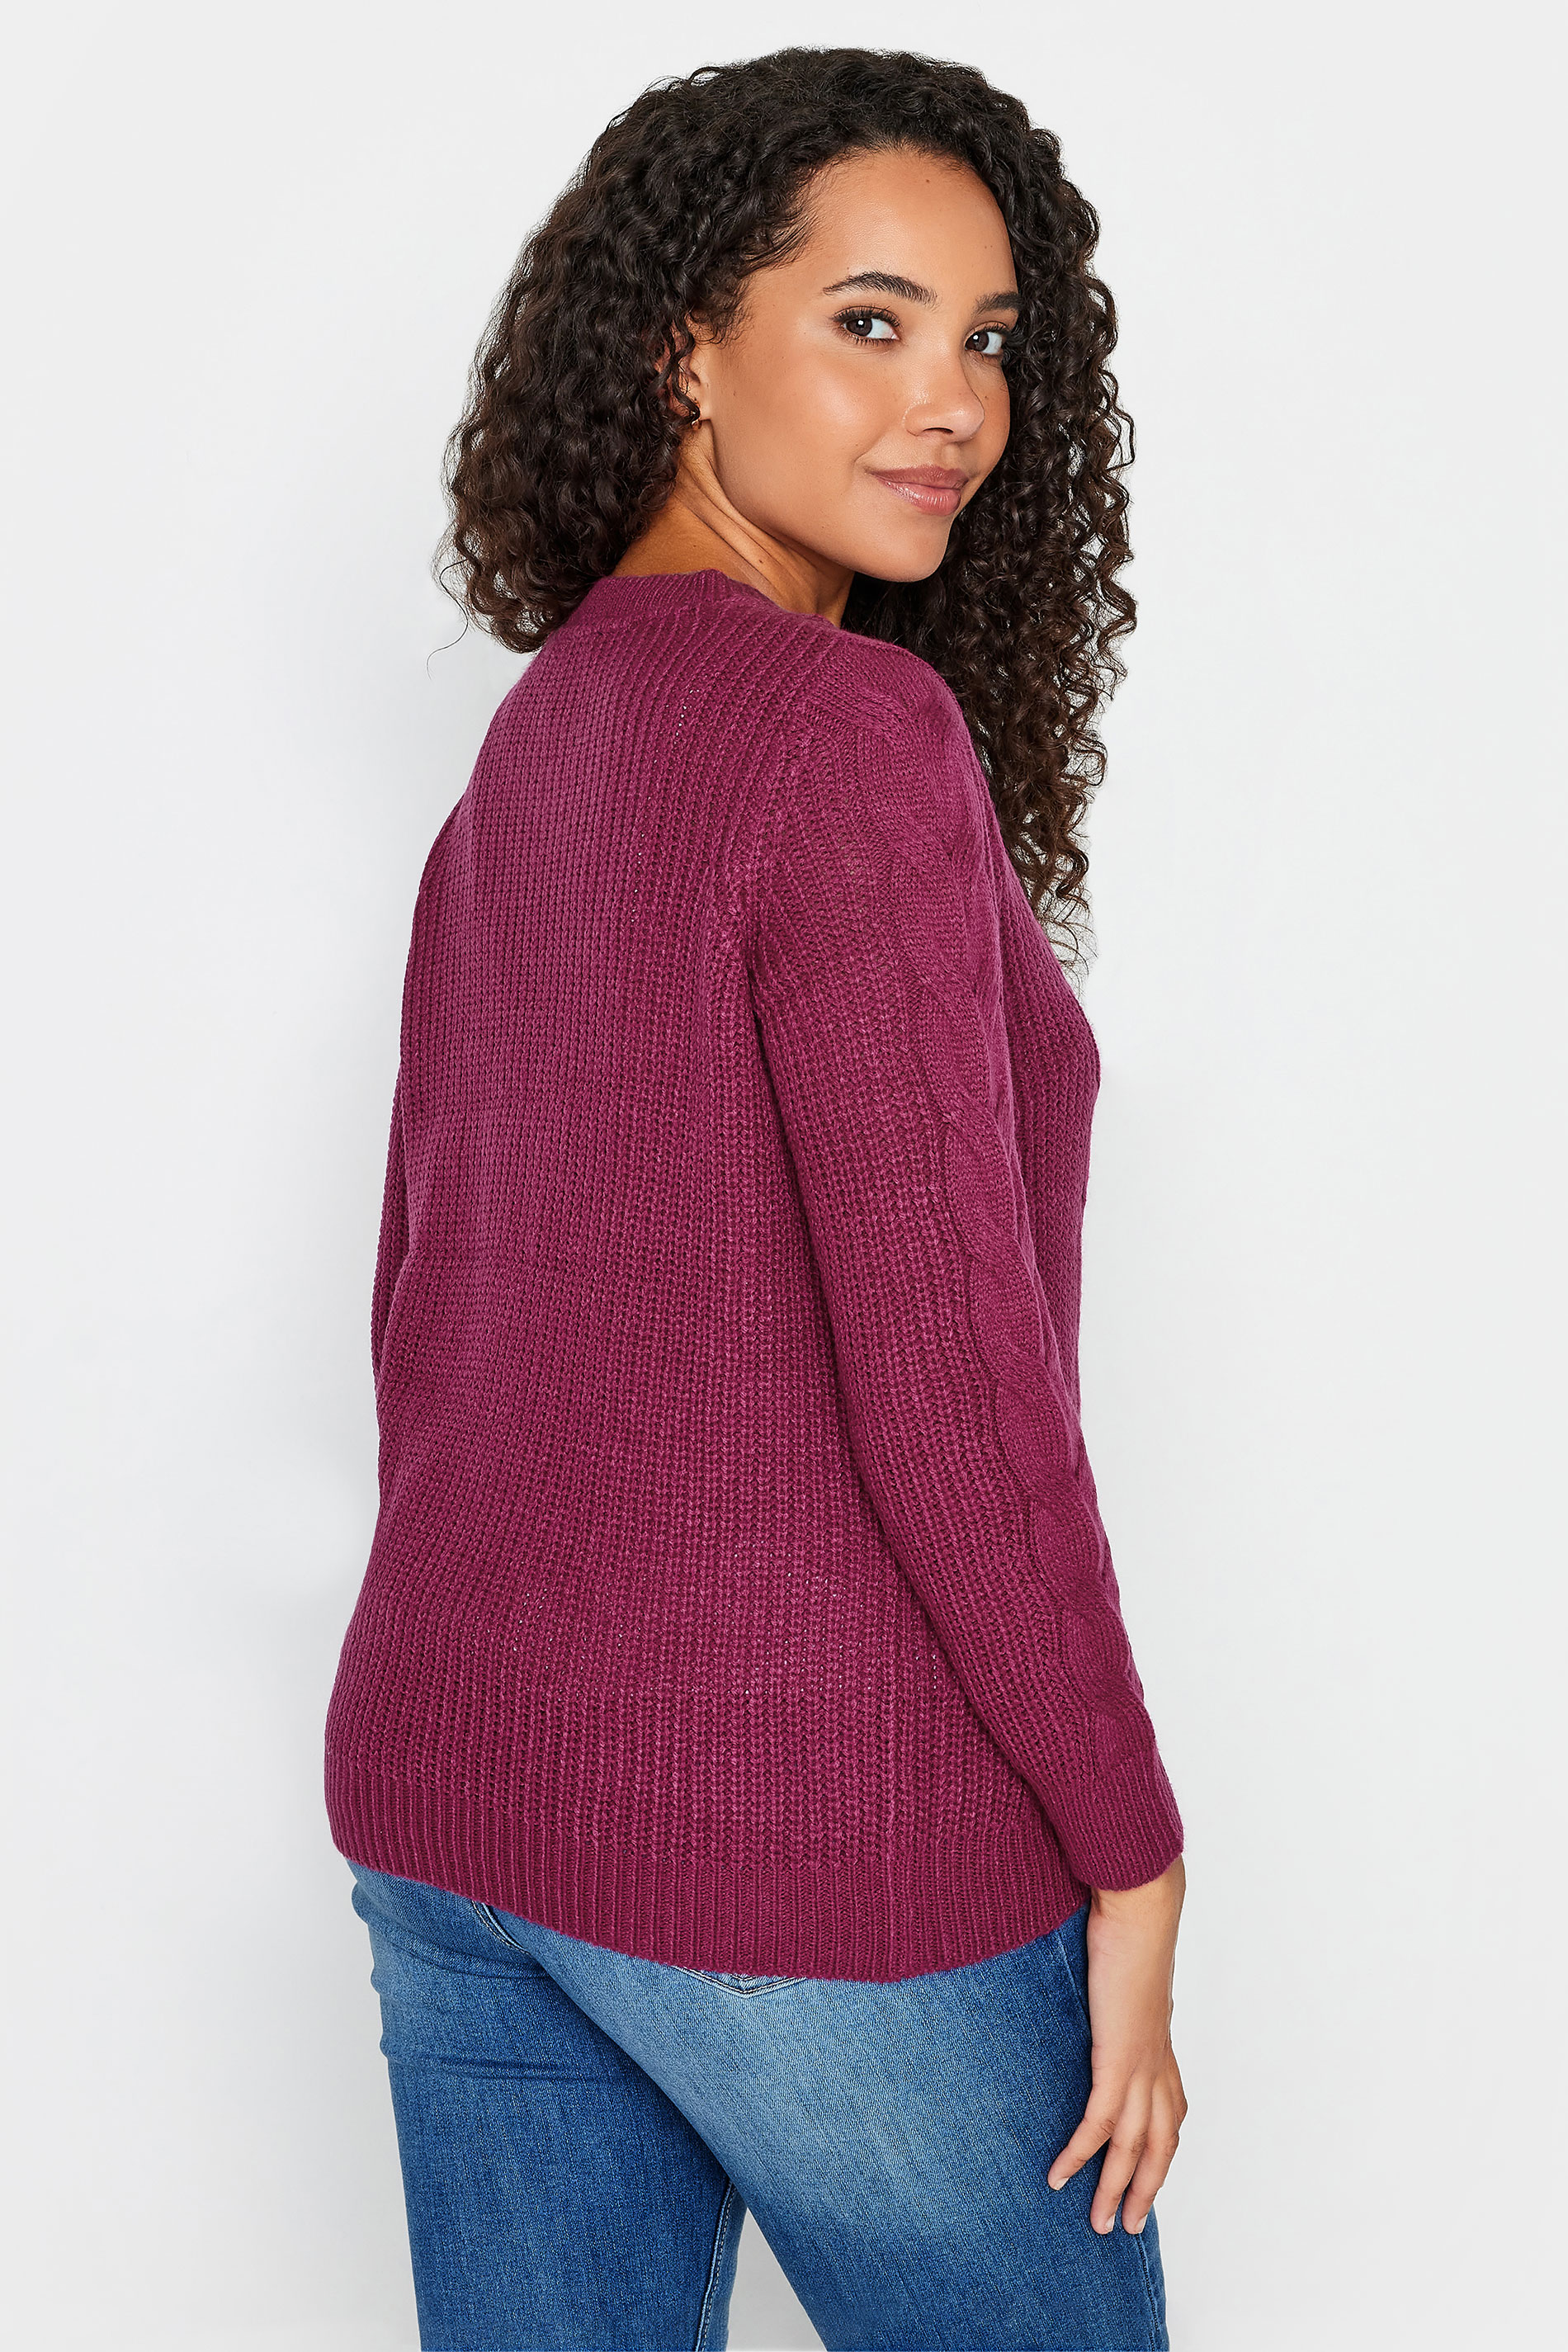 M&Co Dark Pink Cable Knit Jumper | M&Co